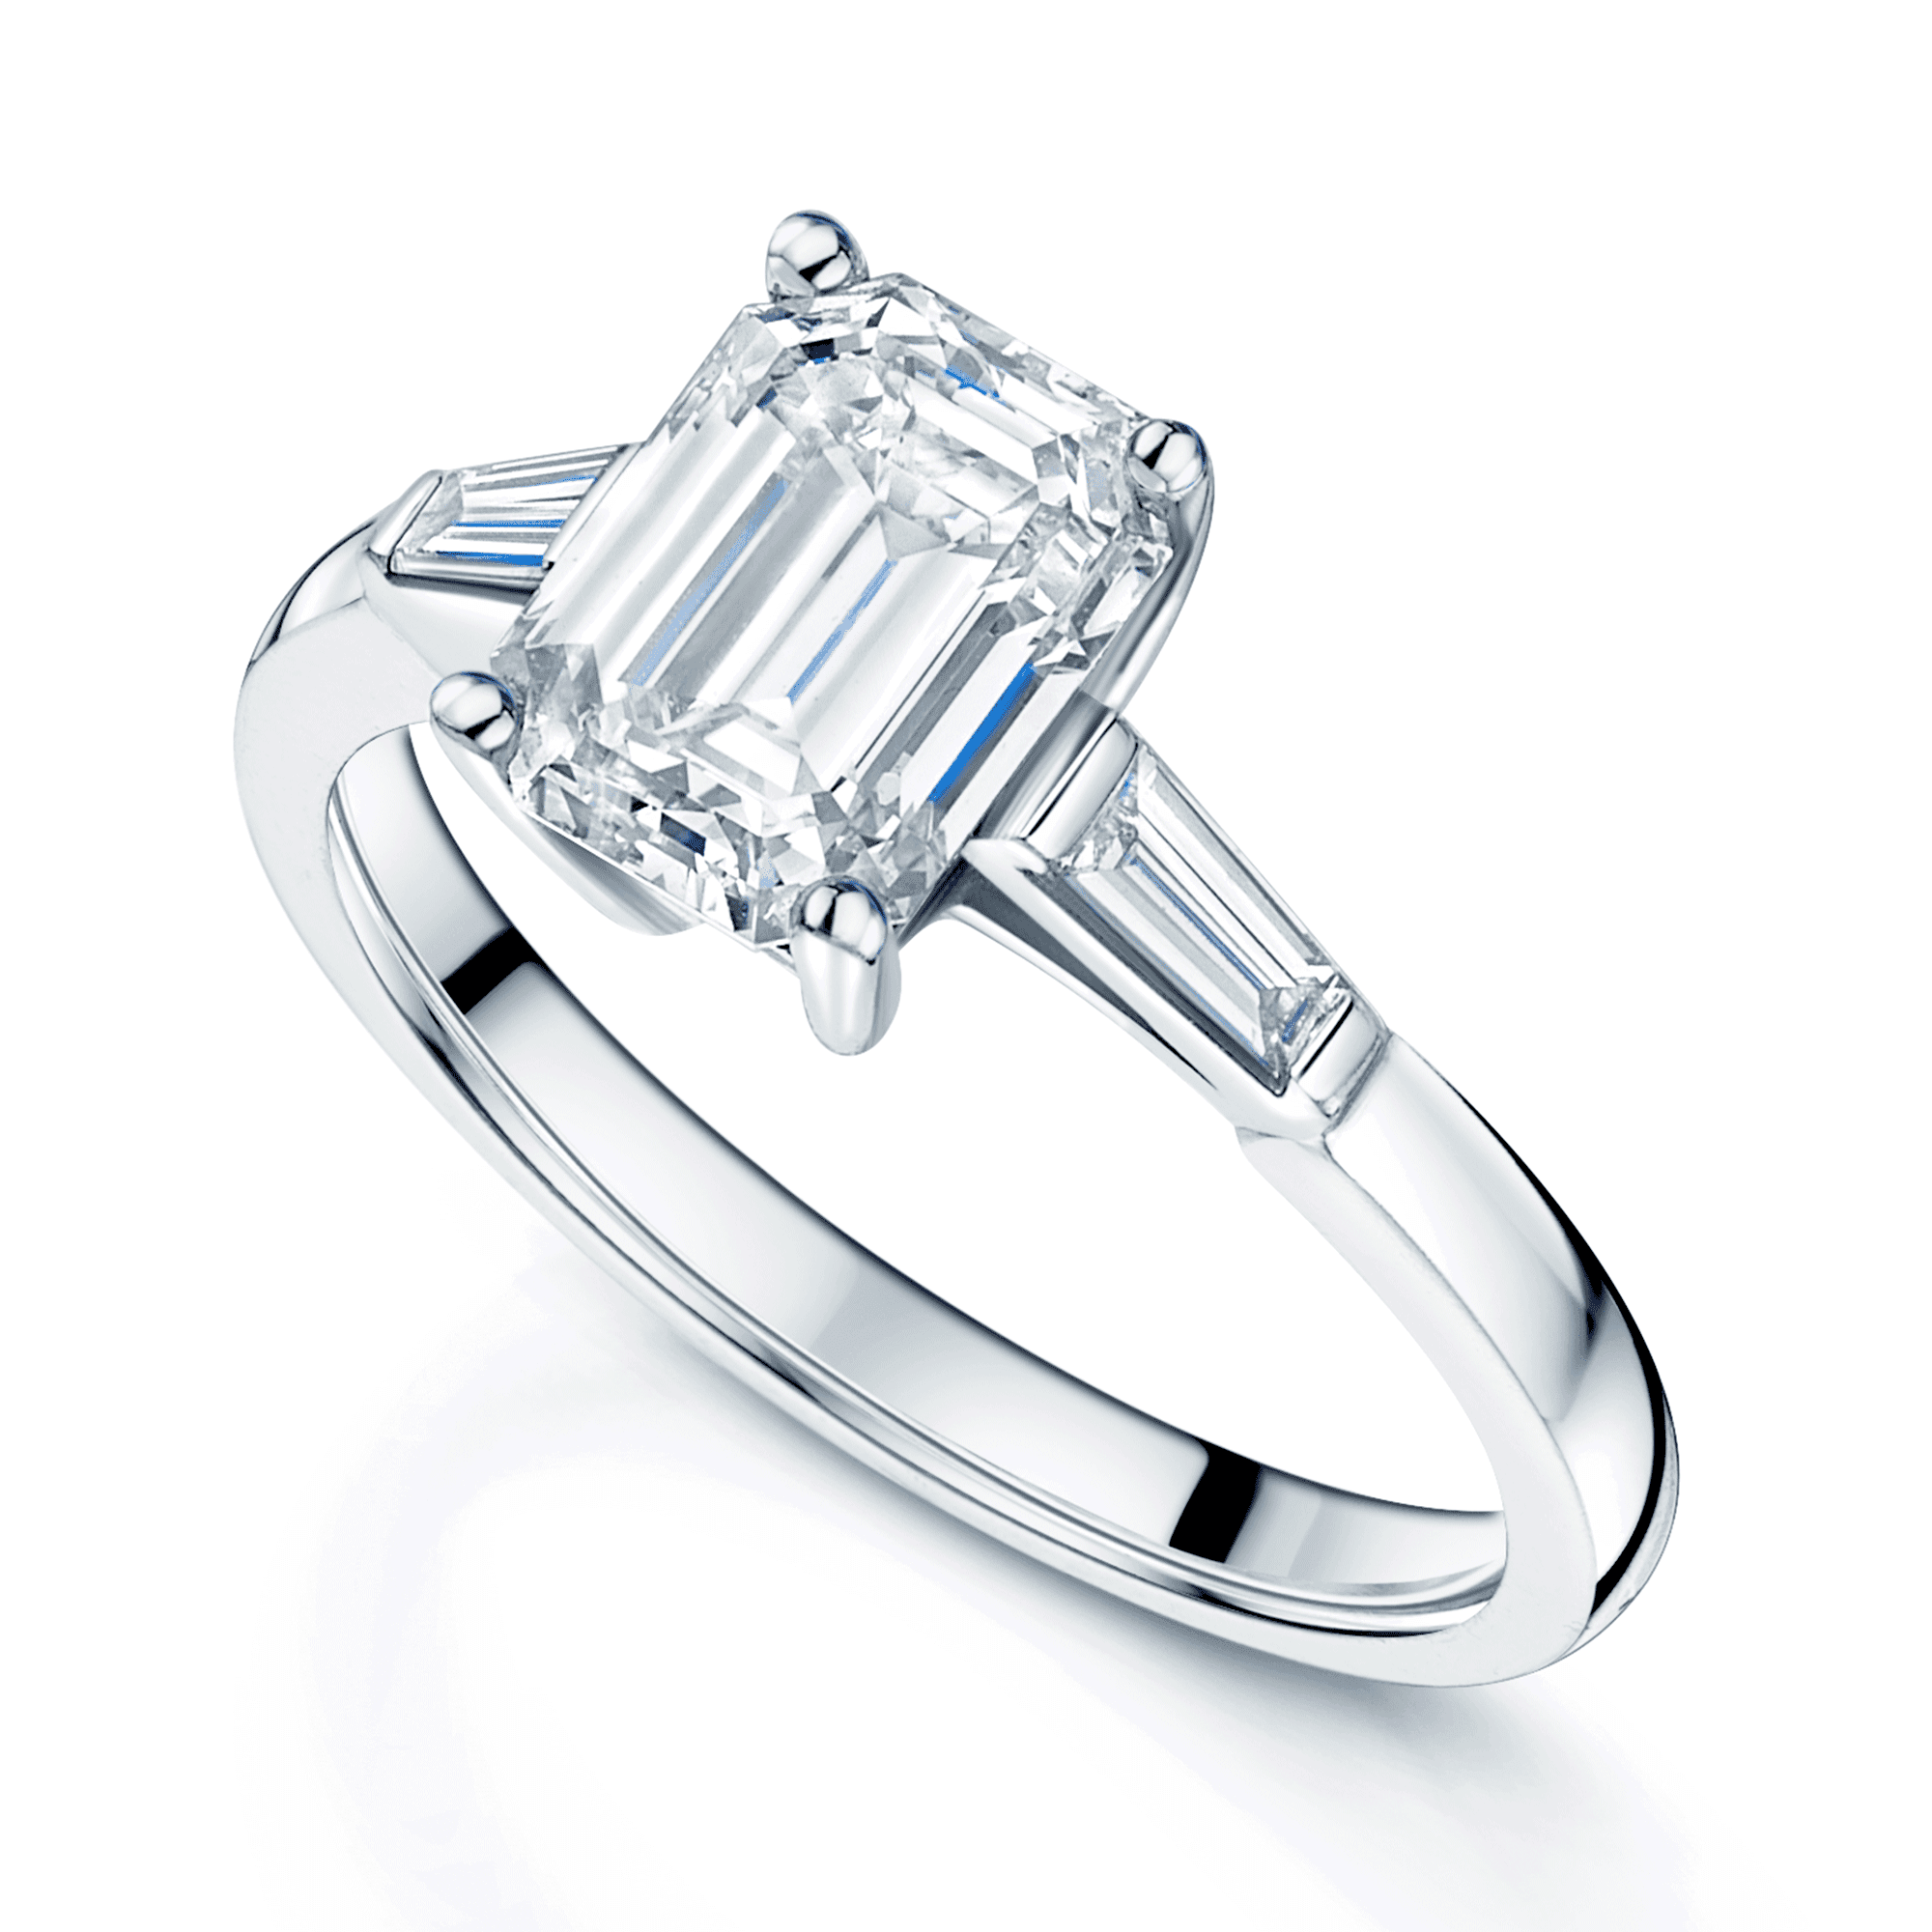 Platinum GIA Certificated Emerald Cut Diamond Ring With Taped Baguette Cut Diamond Shoulders